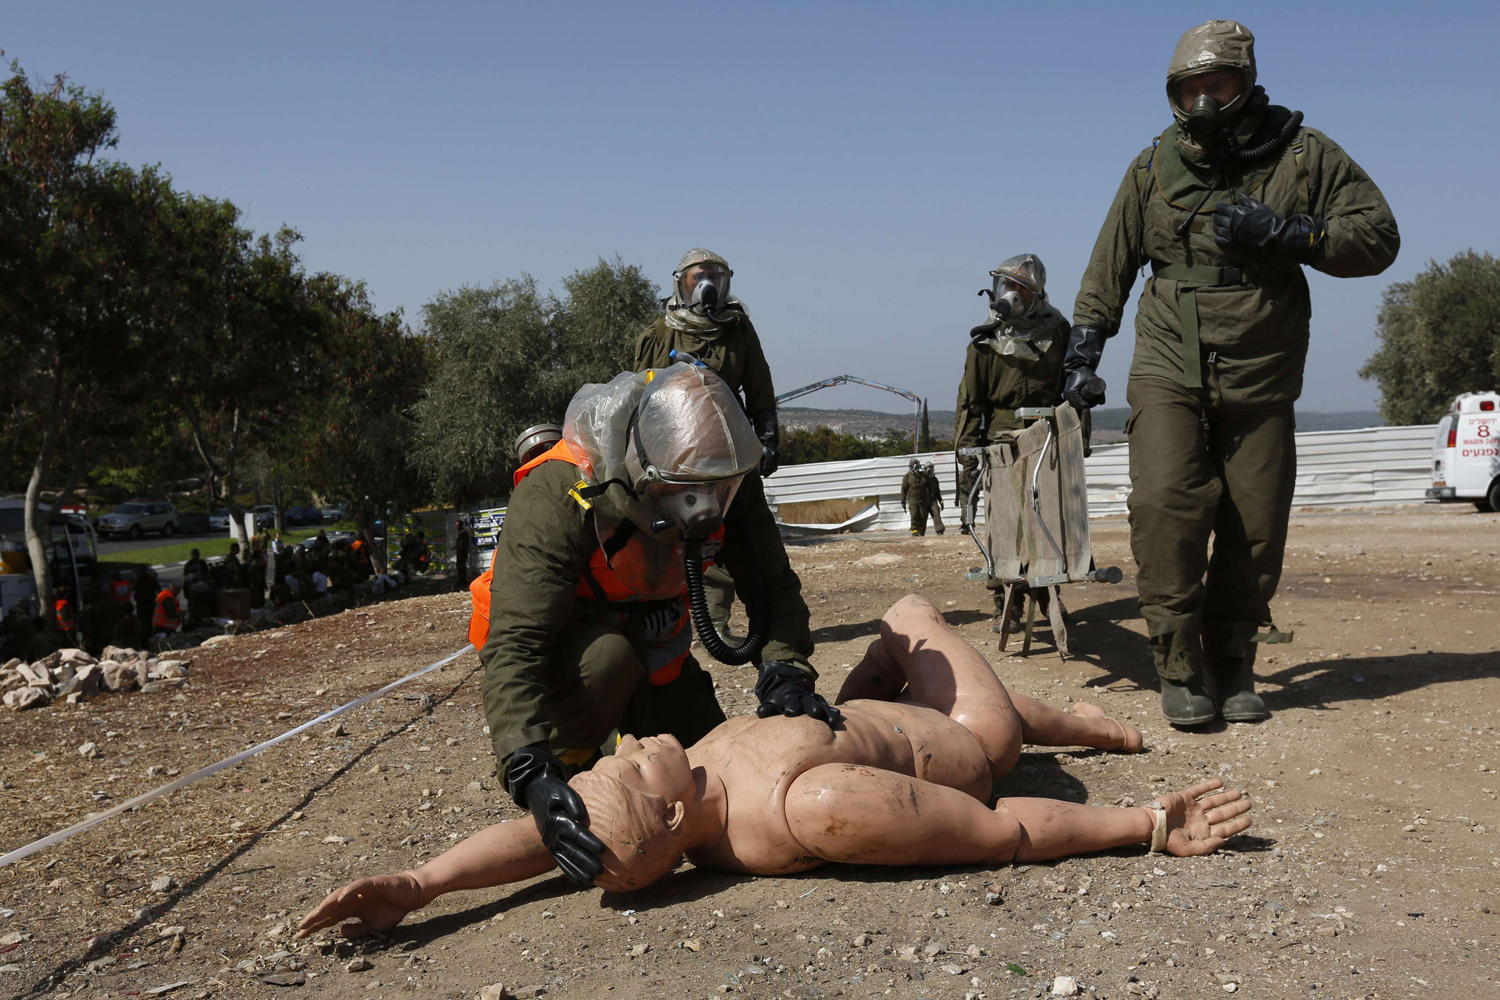 An Israeli soldier from the home front command kneels next to a dummy during a drill near Jerusalem